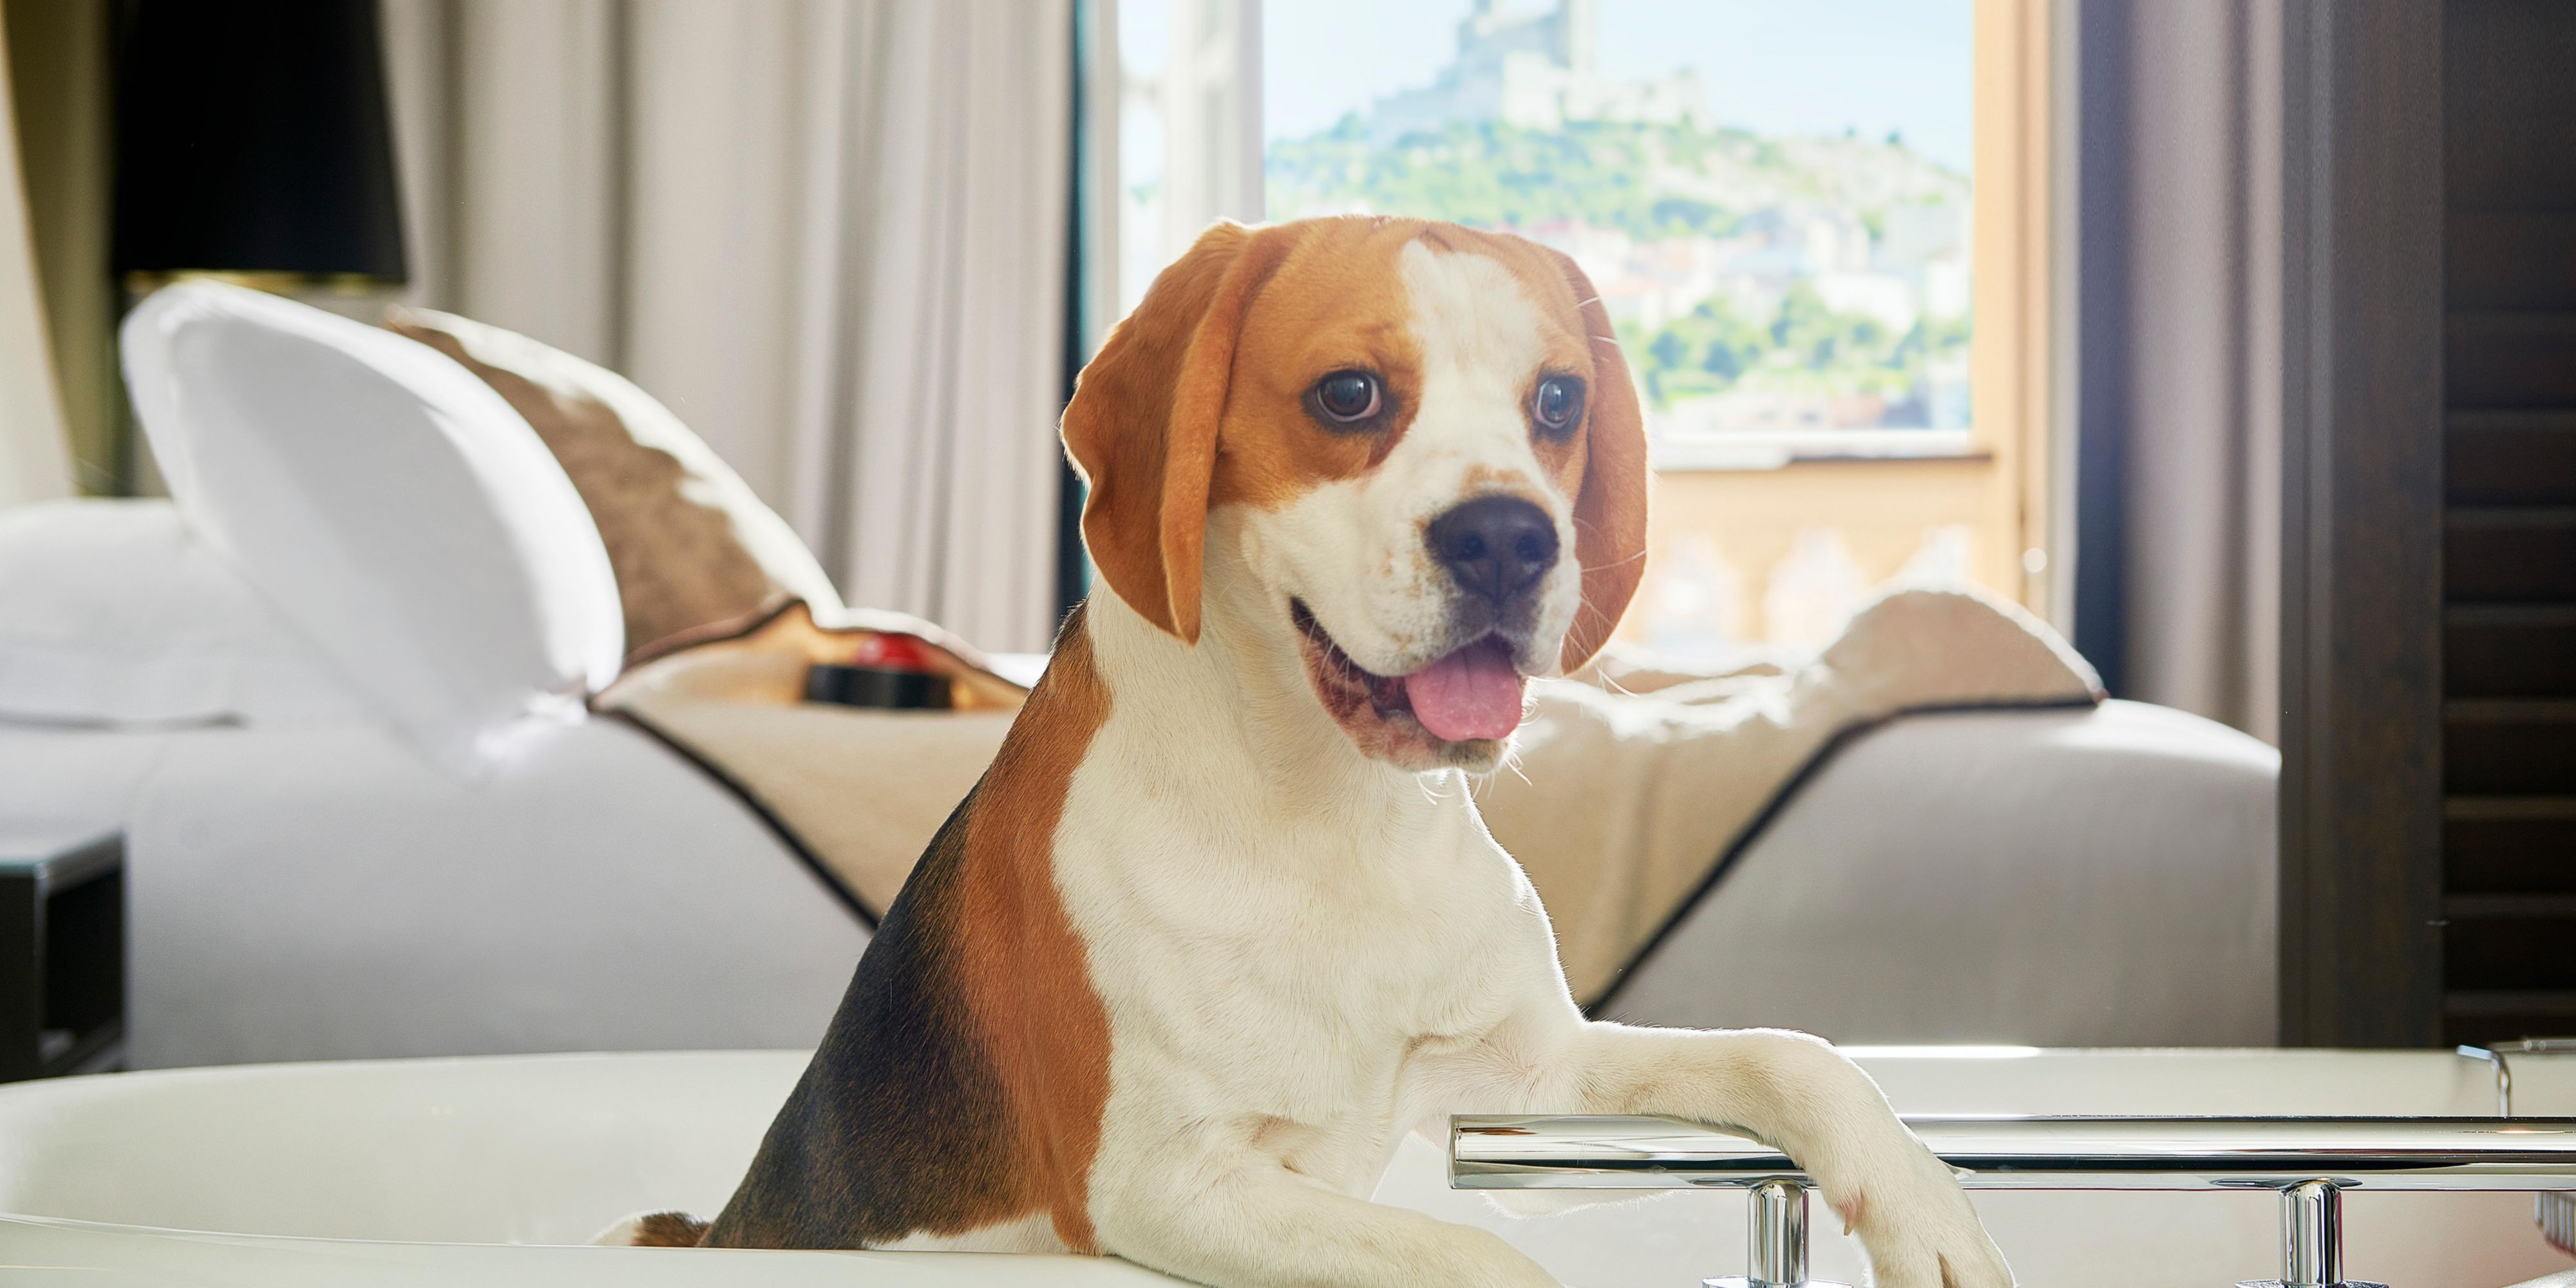 The InterContinental Marseille – Hotel Dieu is proud to be a pet-friendly hotel. 
Our pet-friendly offer includes a dog bowl, a blanket, a dirt-free set, and a menu of small dishes from which to choose, available via room service.